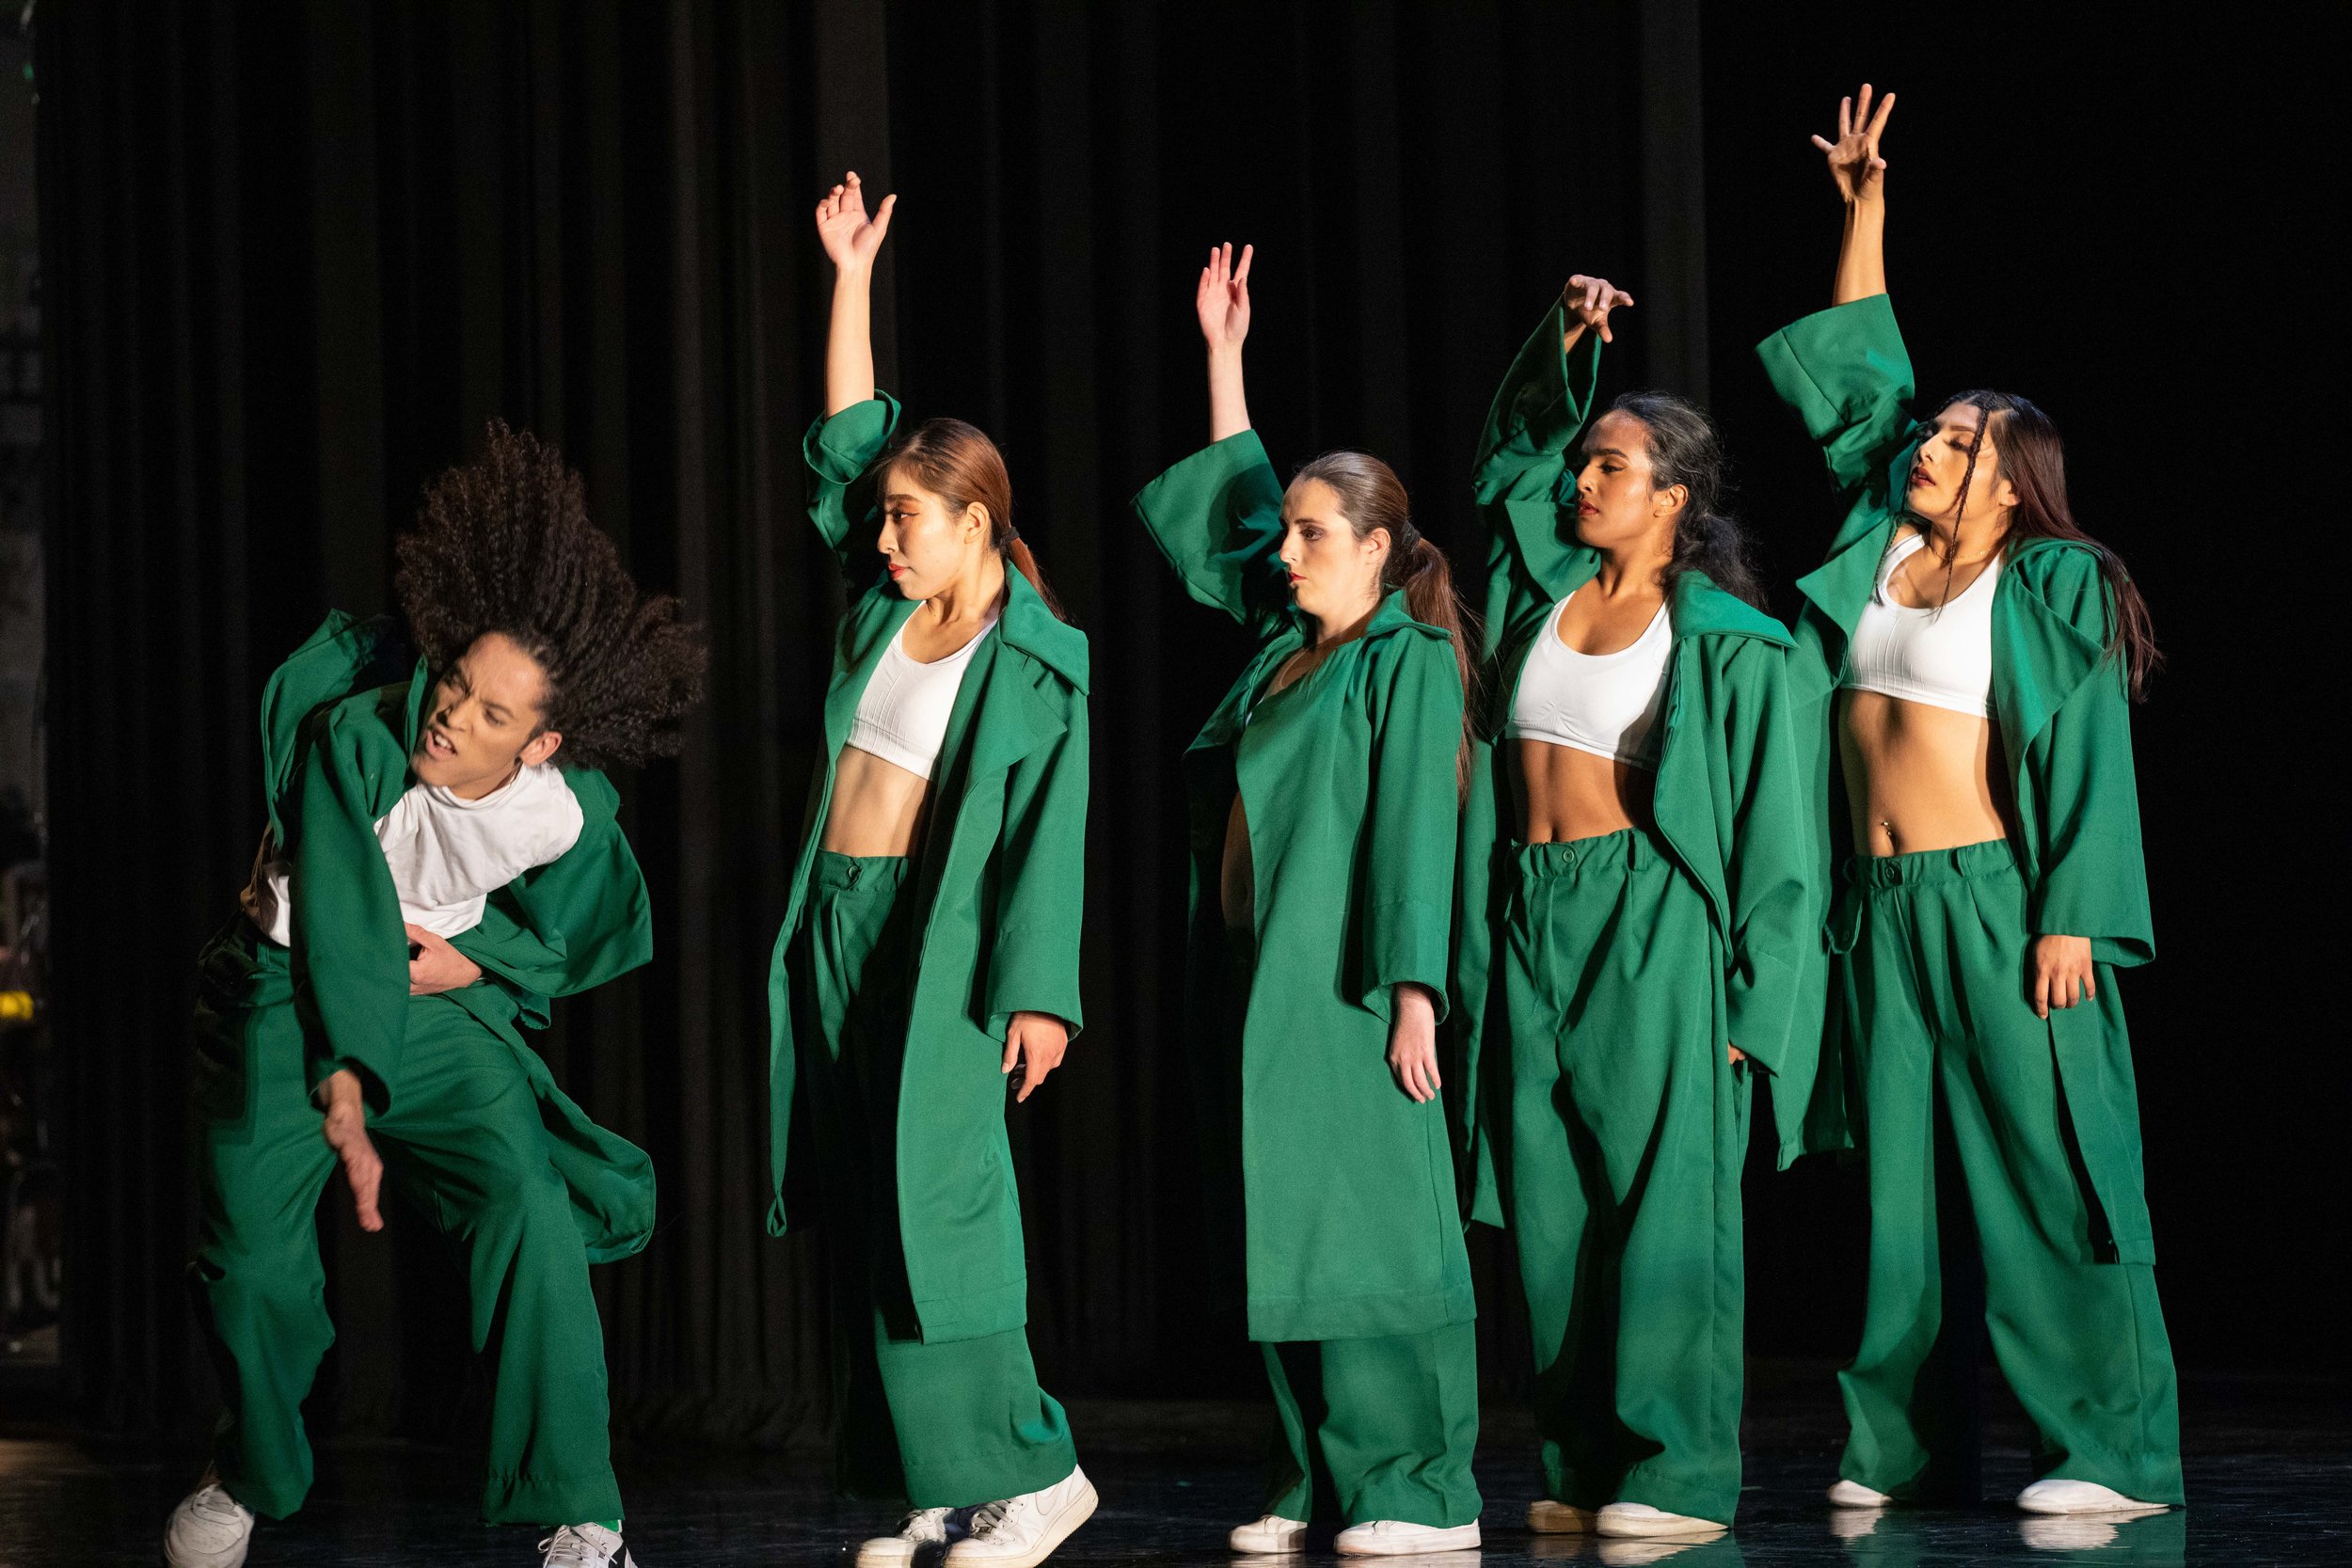  SMC students perform world dance styles with the Global Motion World Dance Company during the live performance at The Broad Theater in Santa Monica, Calif. This company provides a platform for students to experience and learn about other cultures th